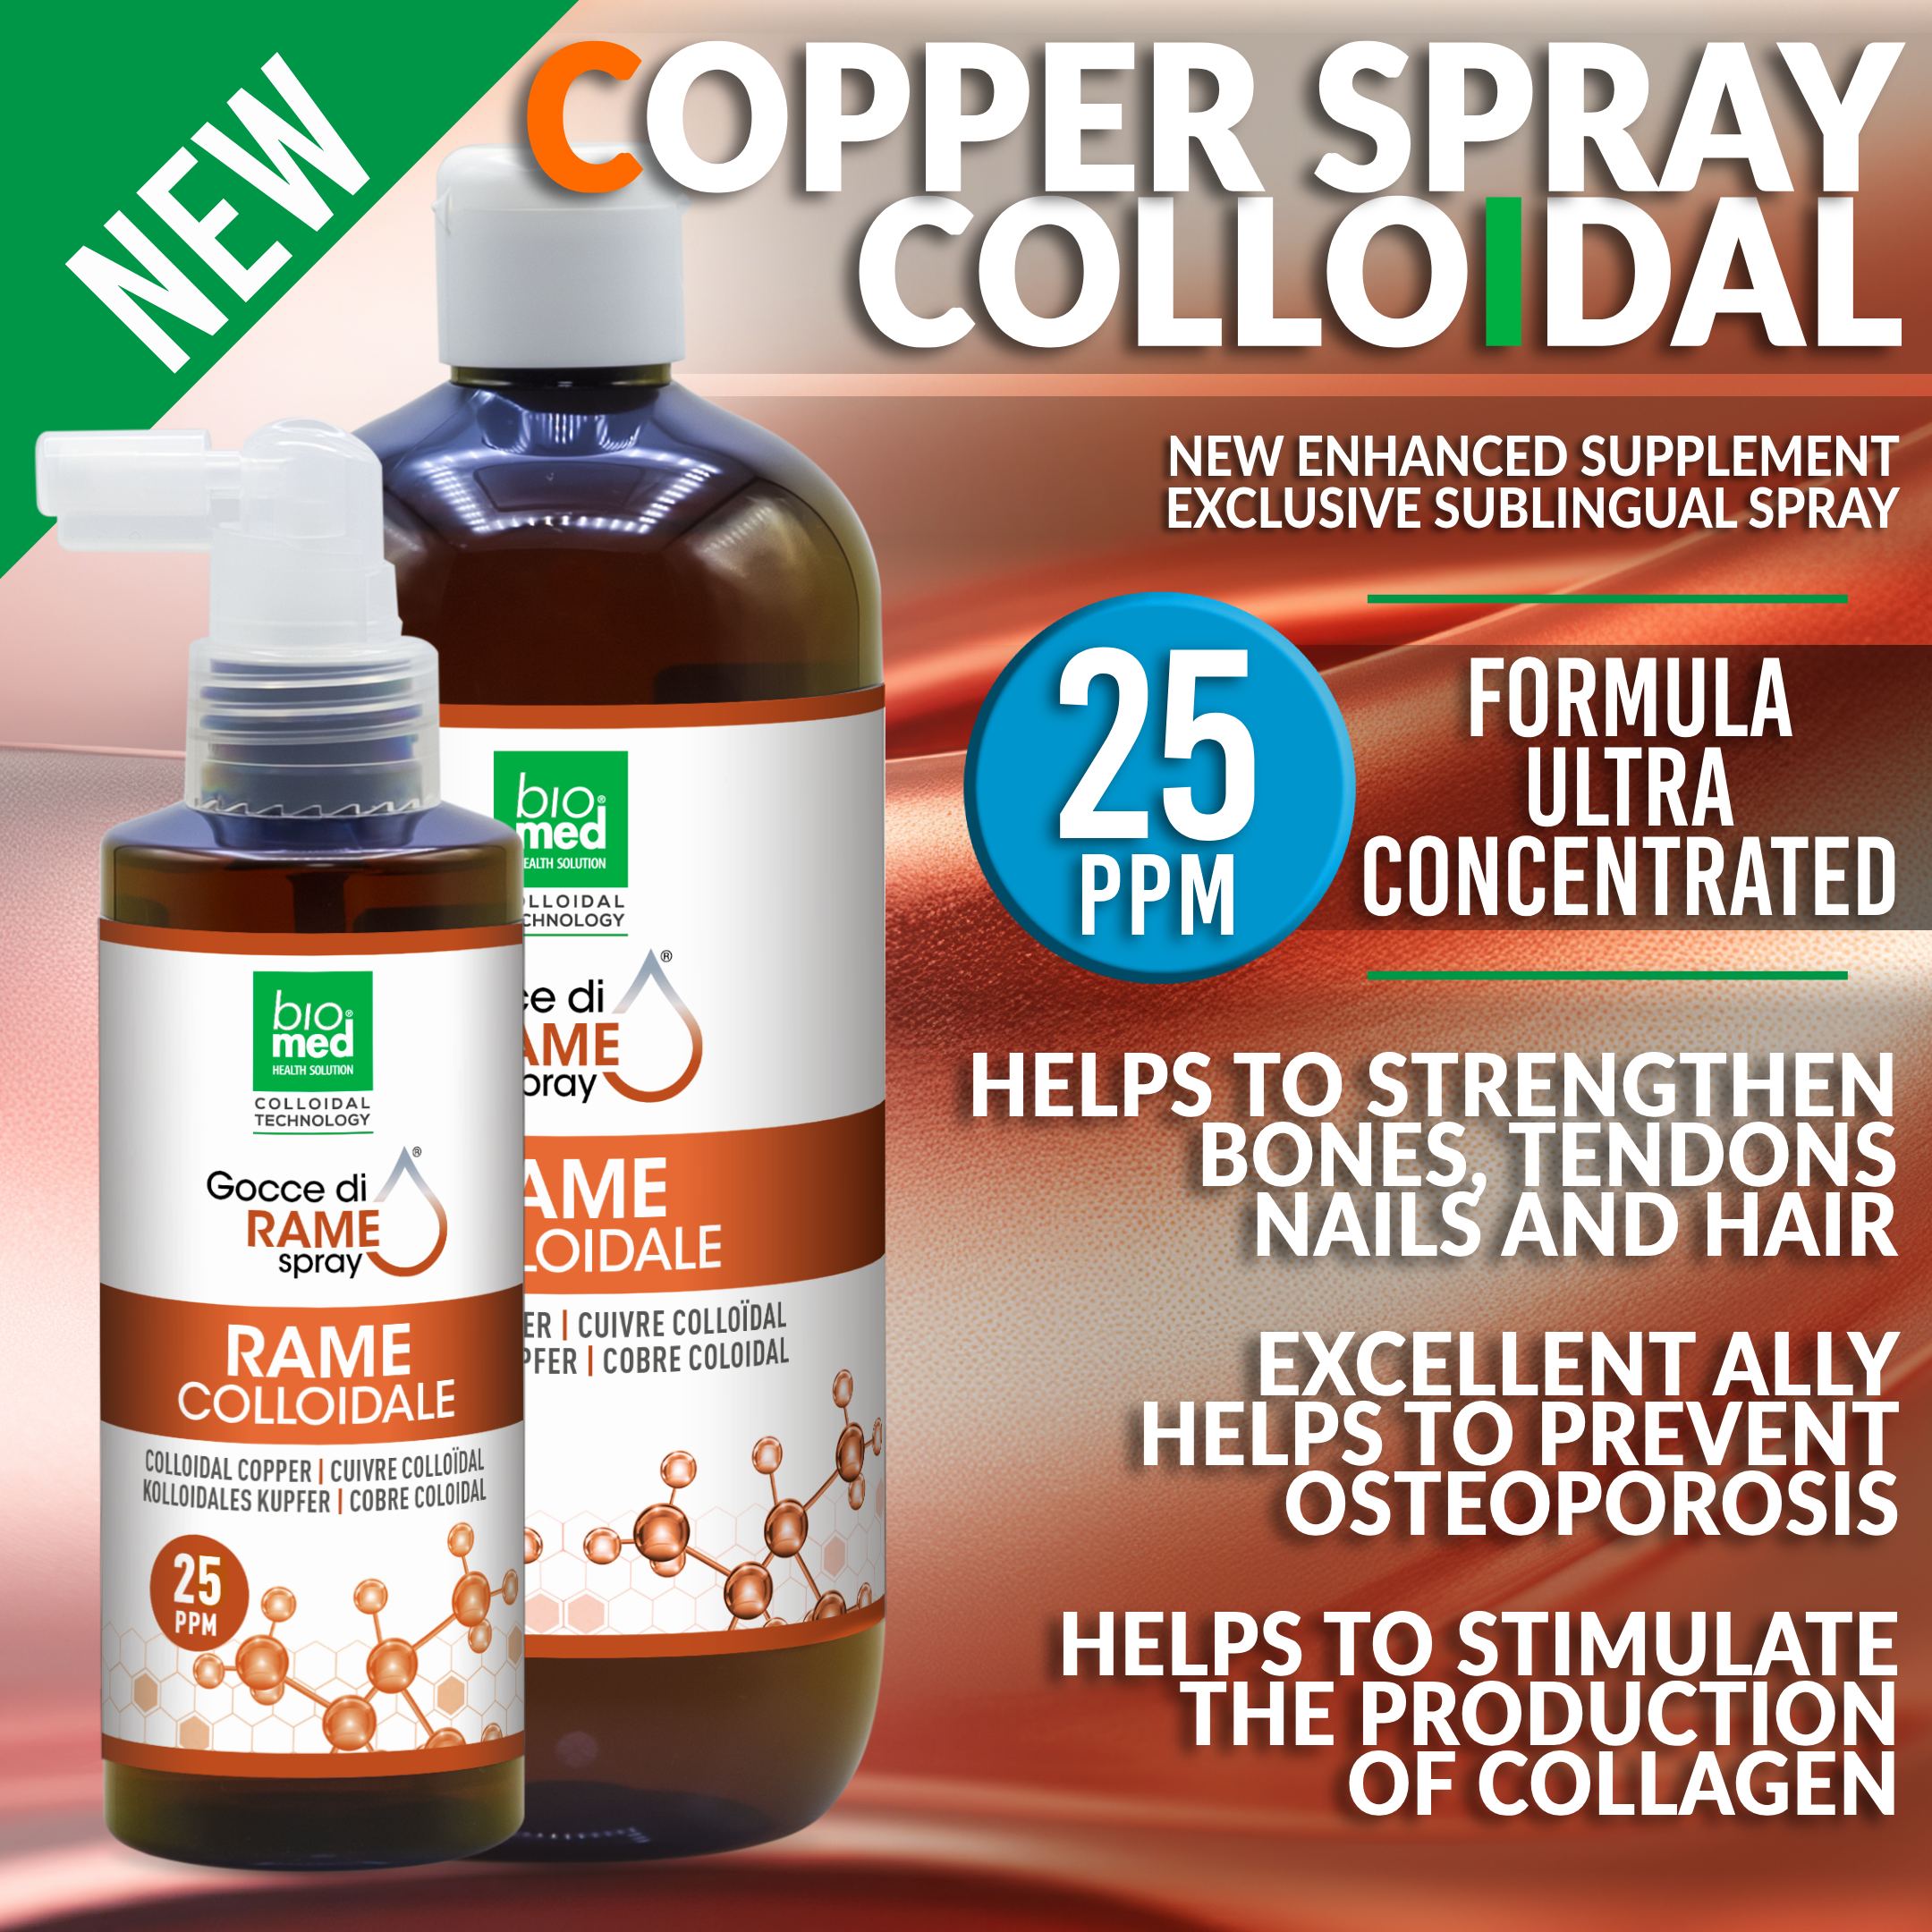 COLLOIDAL COPPER - ULTRA CONCENTRATED SUBLINGUAL SPRAY SUPPLEMENT - BIOMED 25 PPM